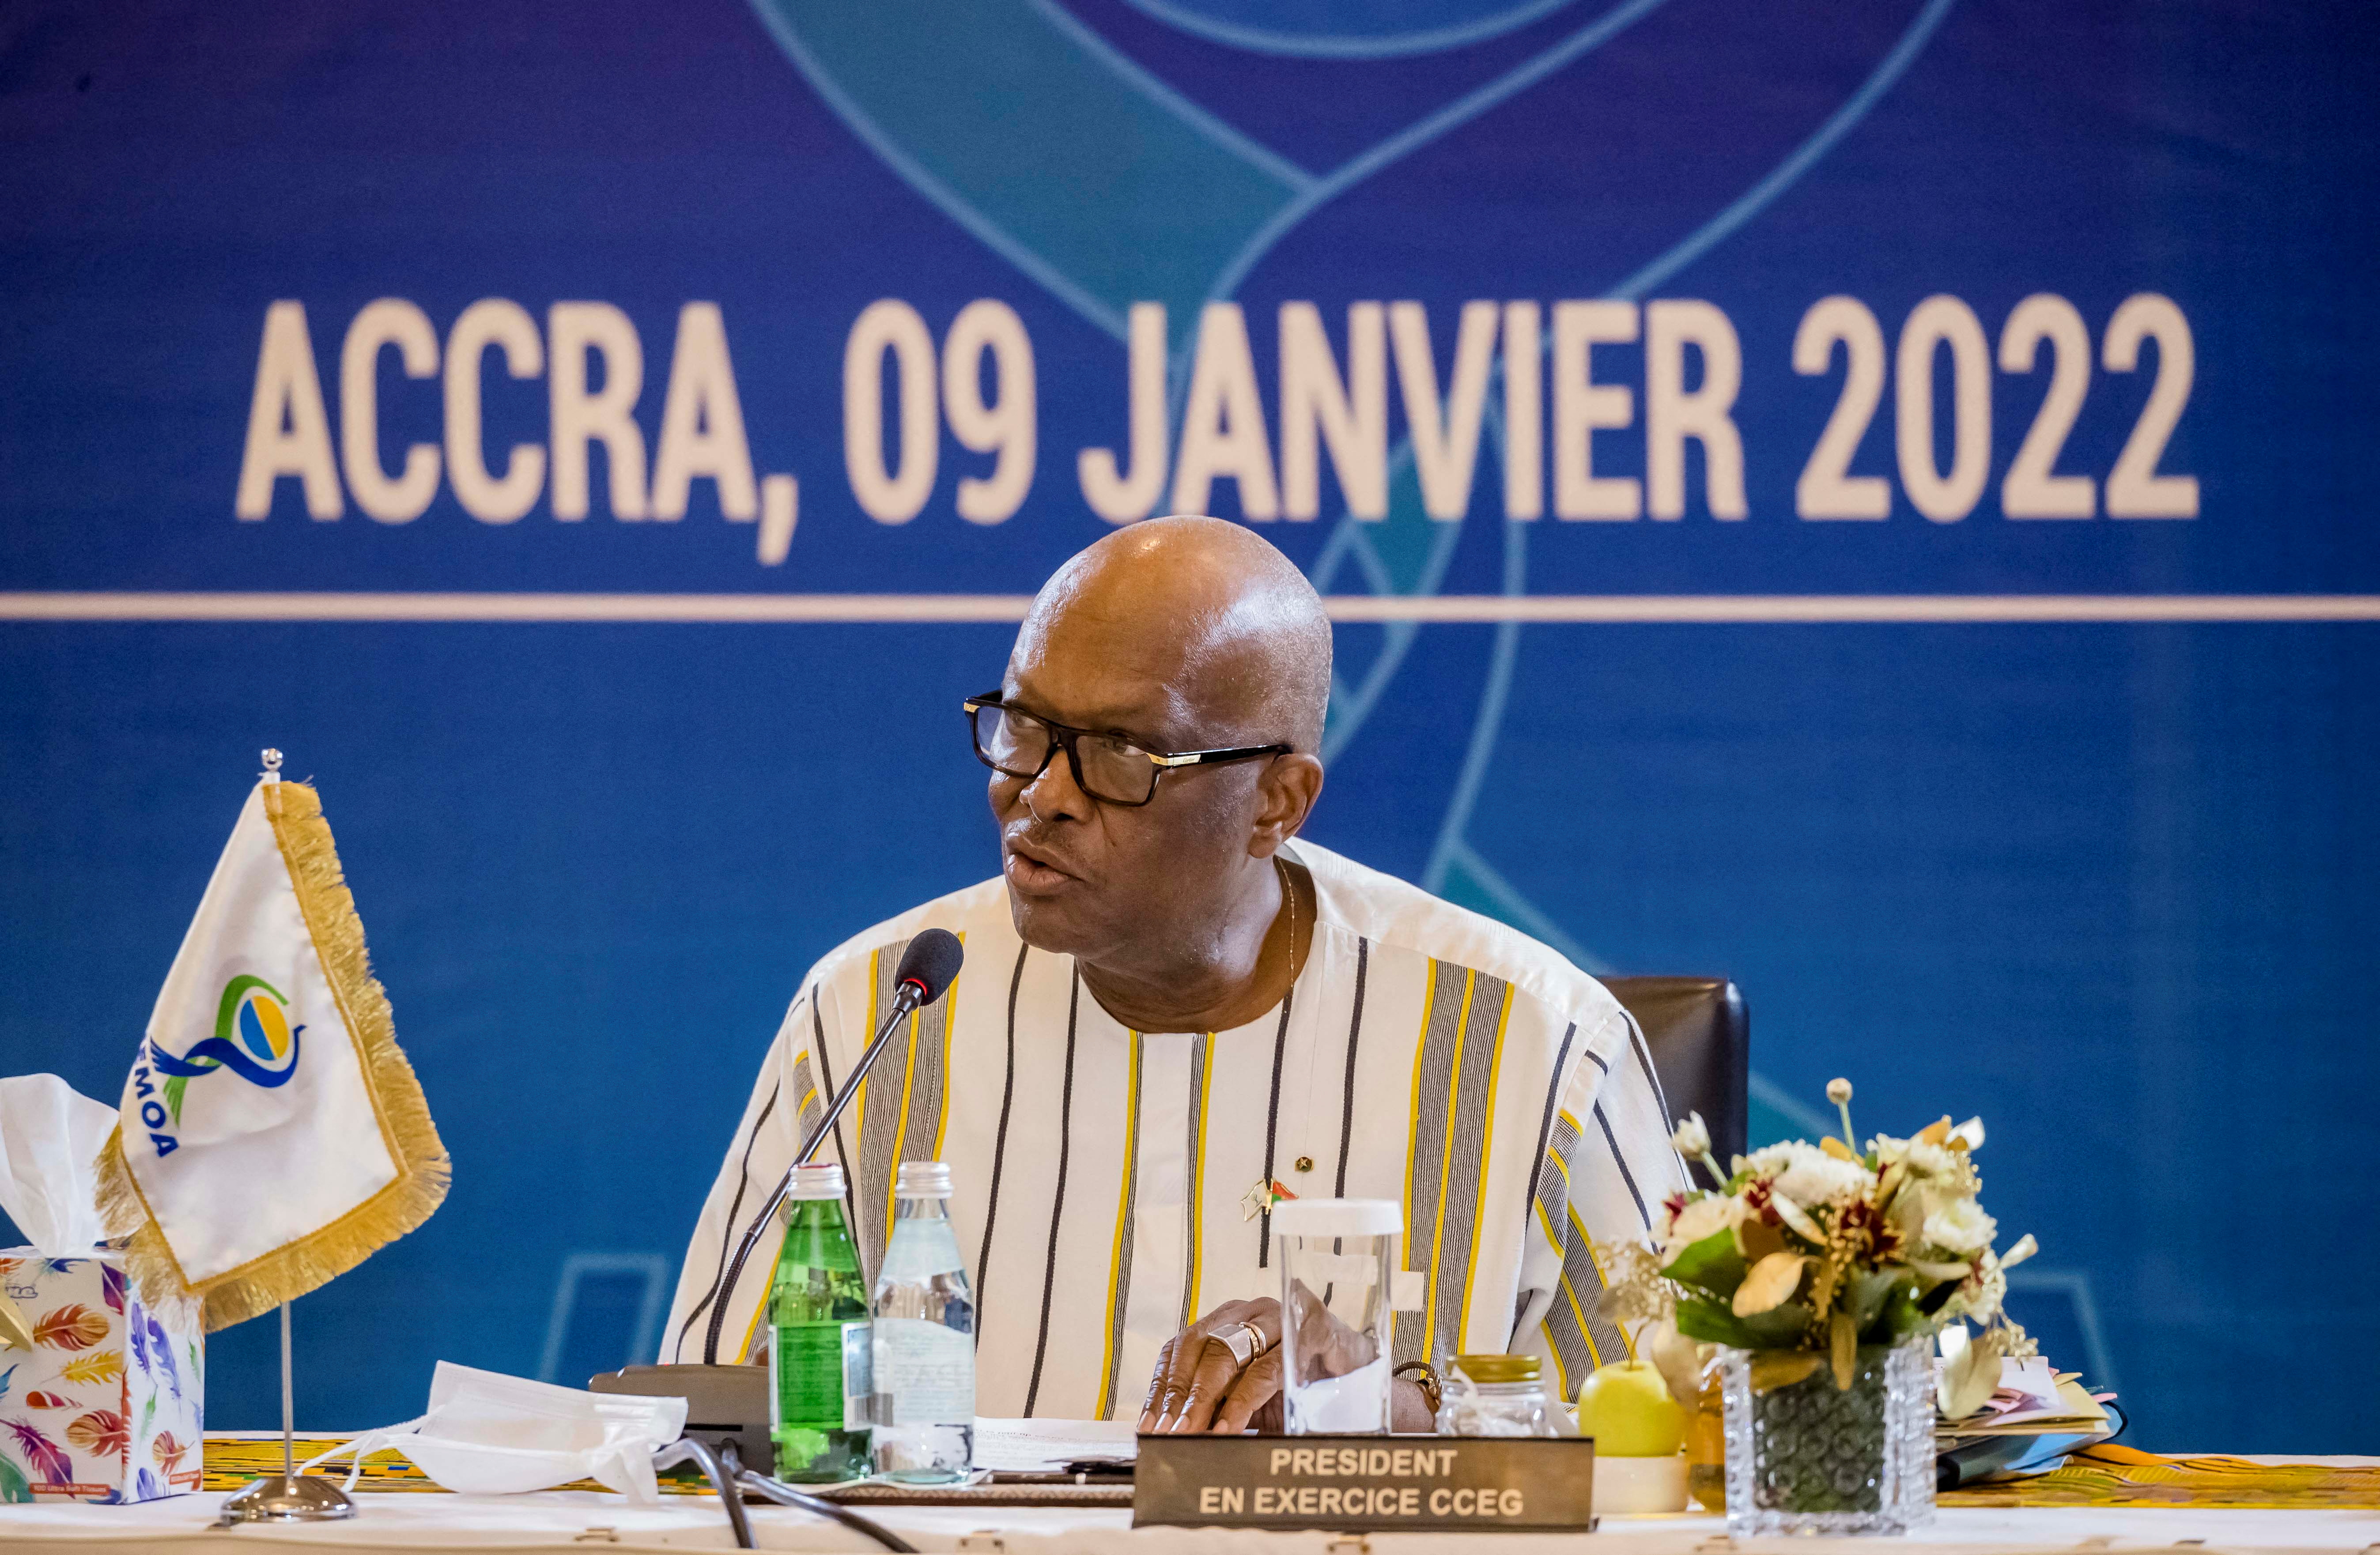 Economic Community of West African States (ECOWAS) extraordinary summit in Accra